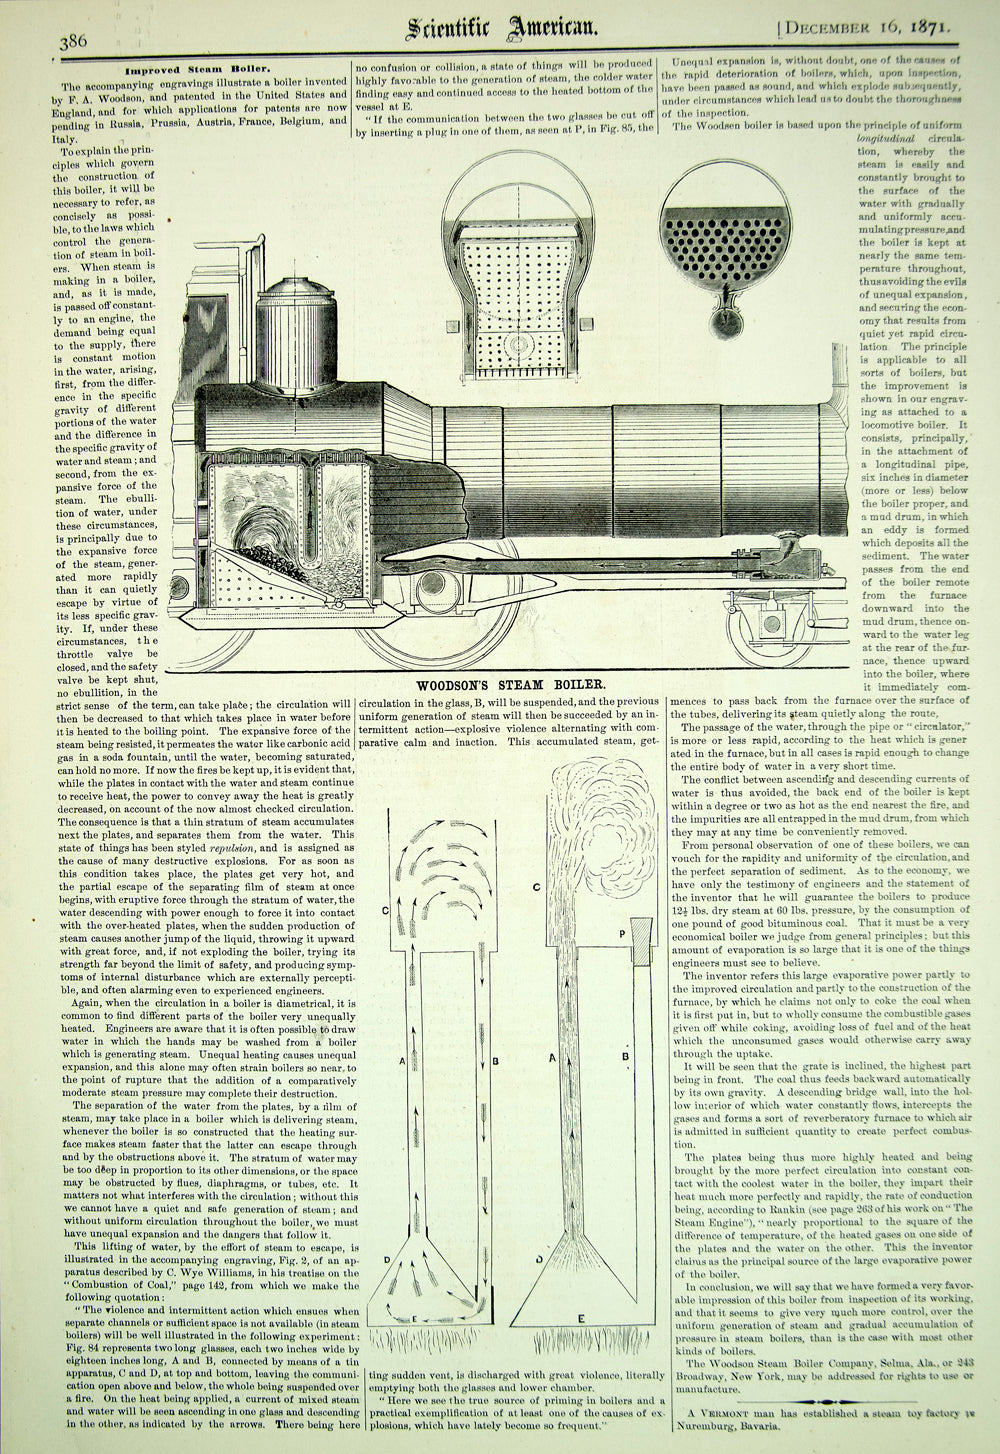 1871 Article F. A. Woodson Steam Boiler Coal Burning Machinery Invention YSA3